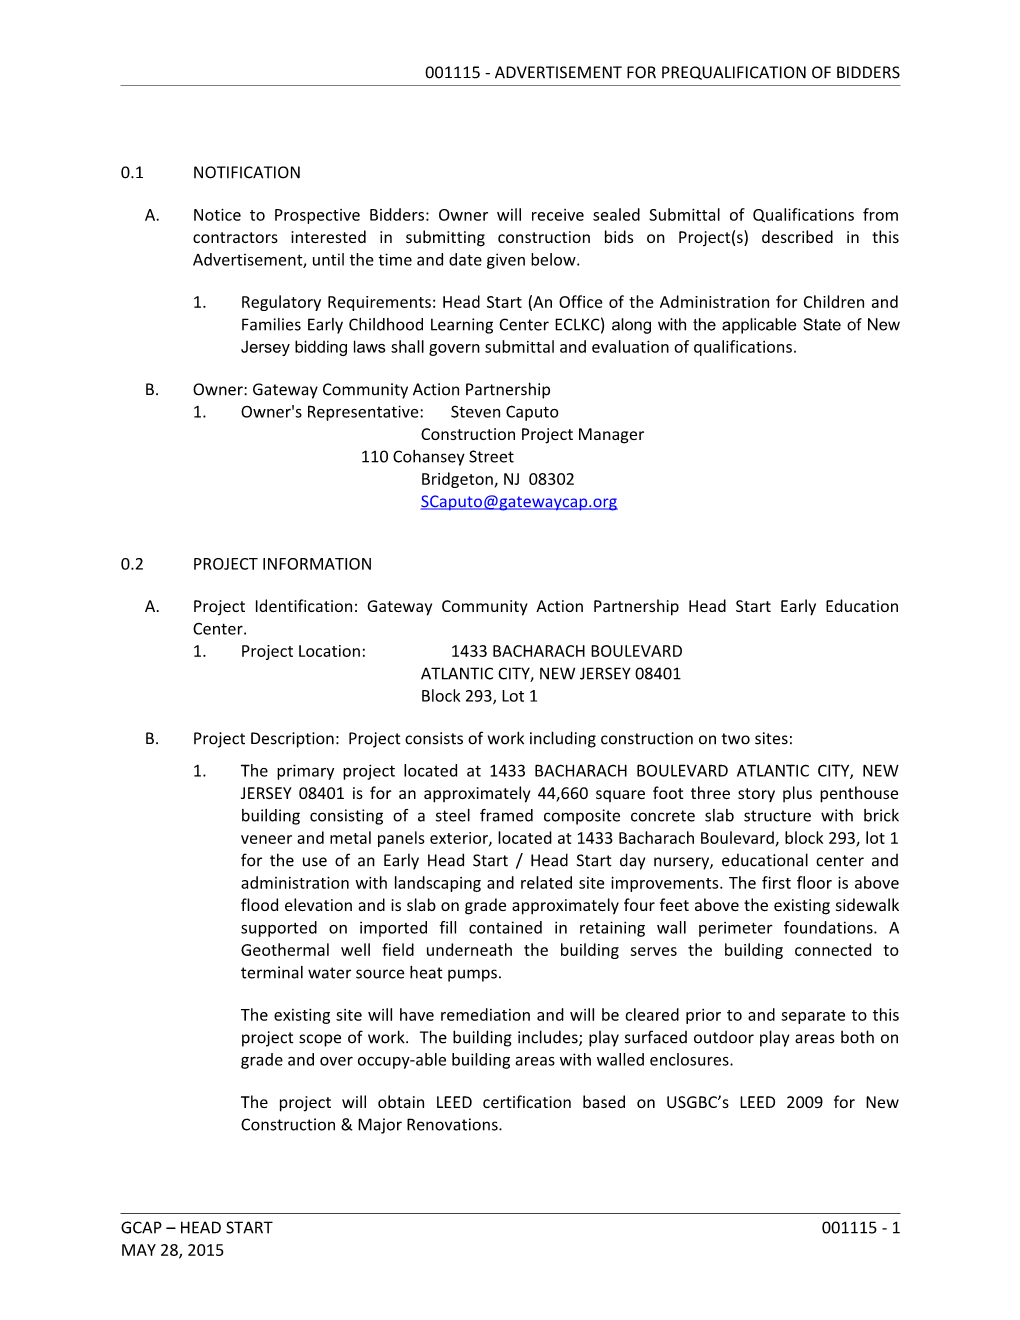 Section 001115 - Advertisement for Prequalification of Bidders